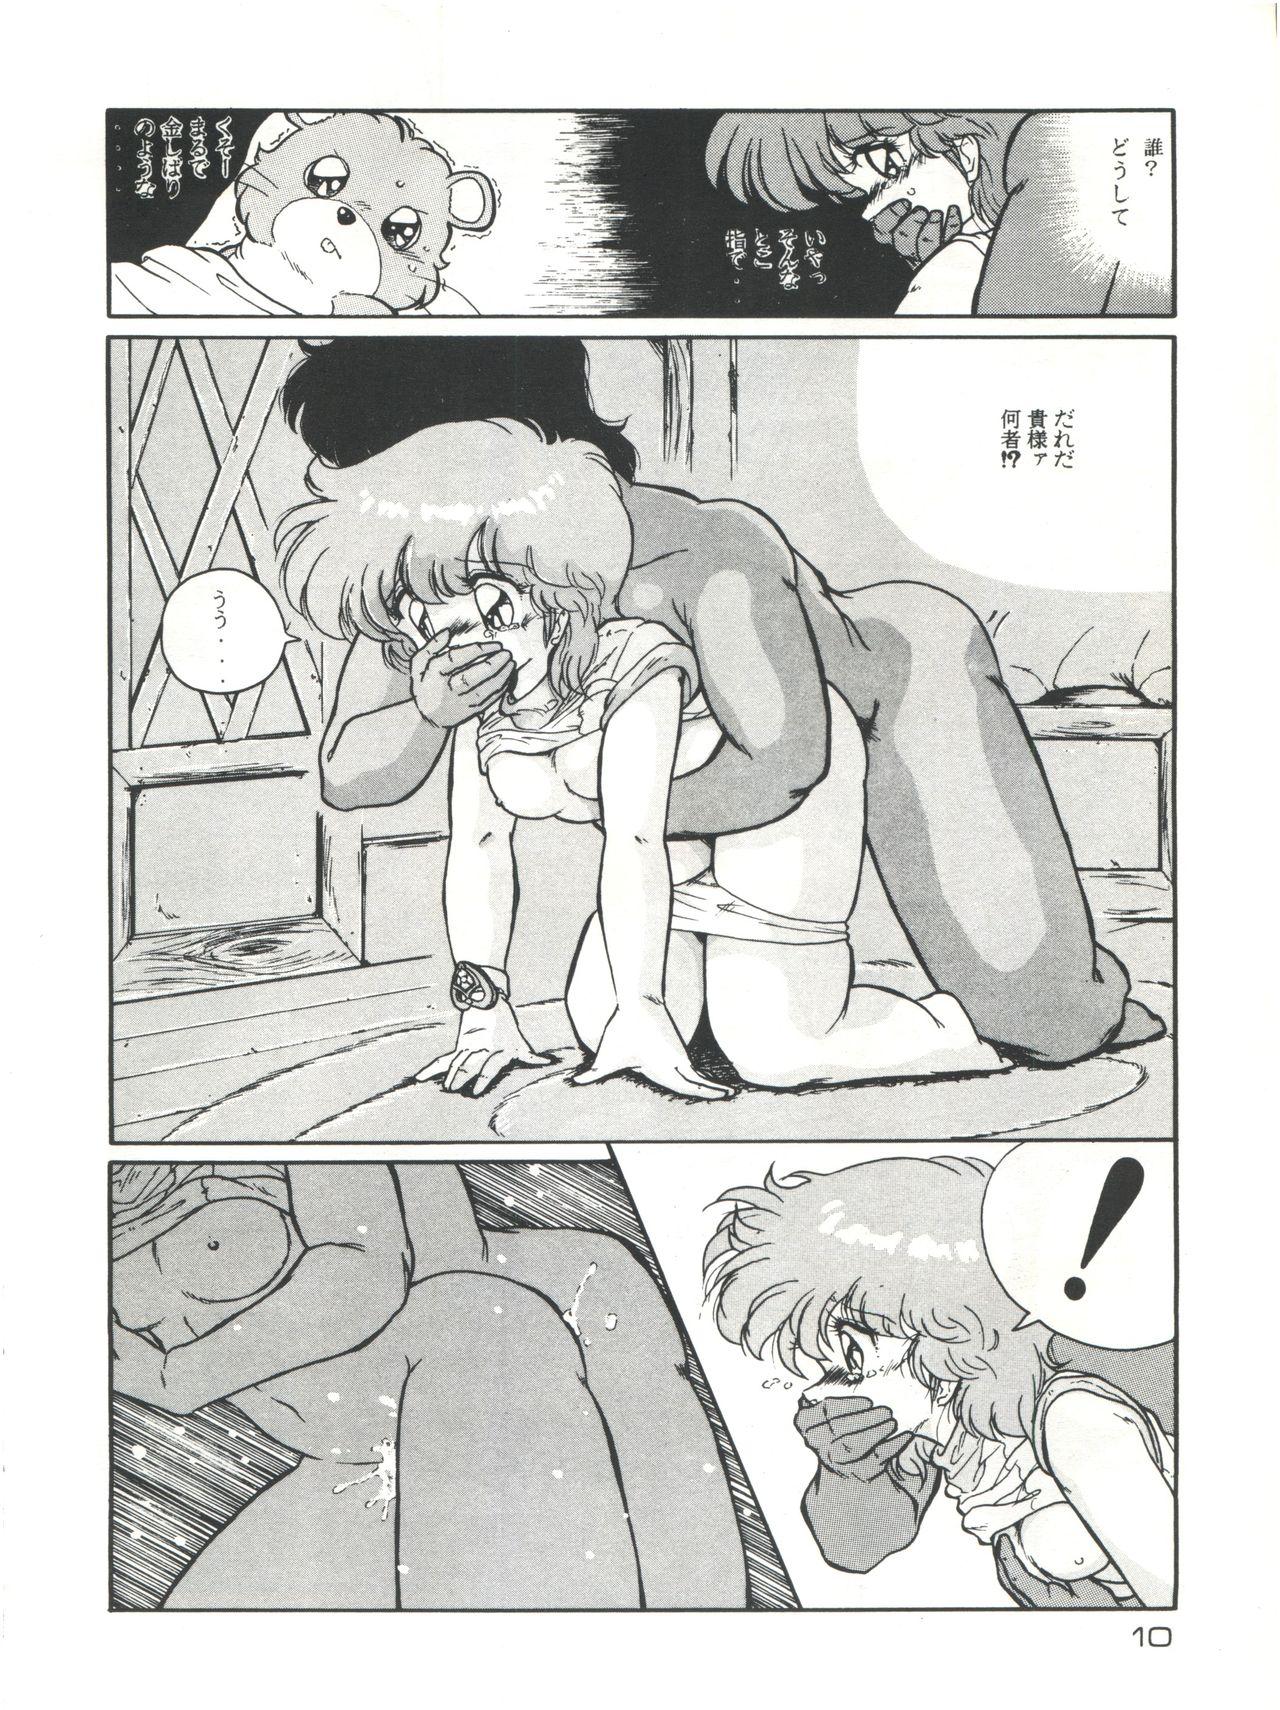 Gaystraight Meta-All‐Extra Kanchumimai vol.2 - Magical emi French - Page 9